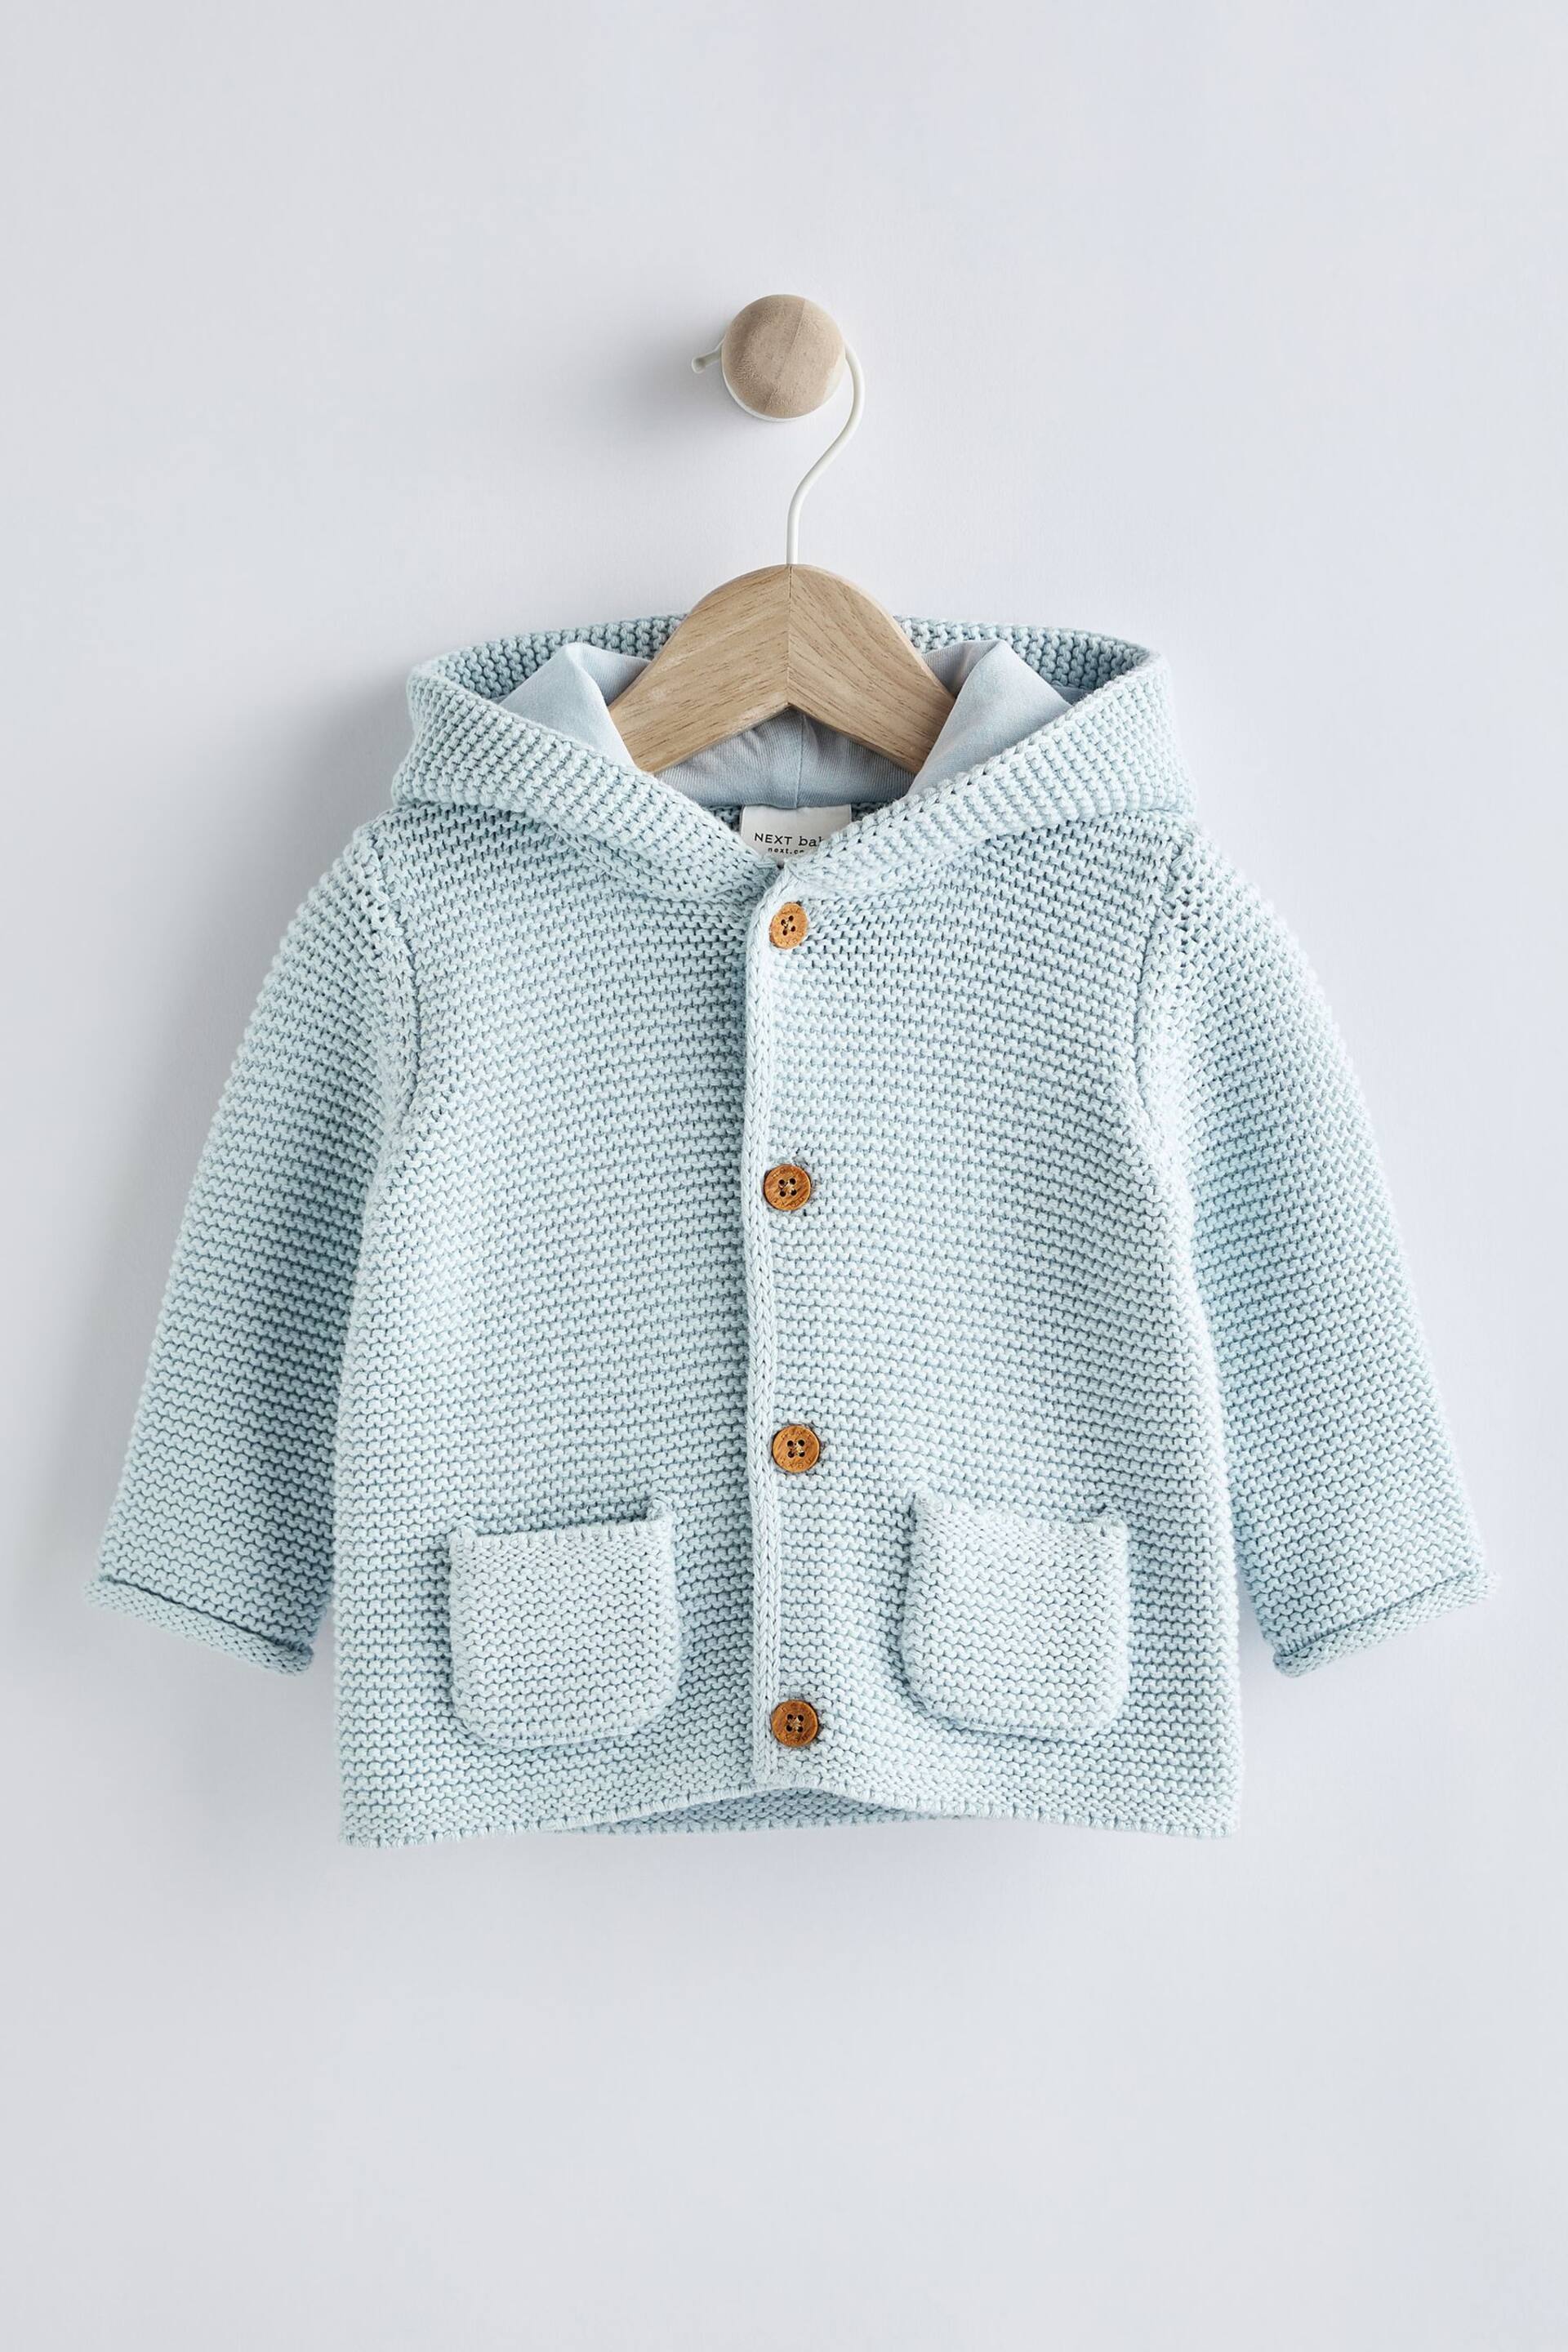 Pale Blue Baby Knitted Cardigan (0mths-3yrs) - Image 1 of 5